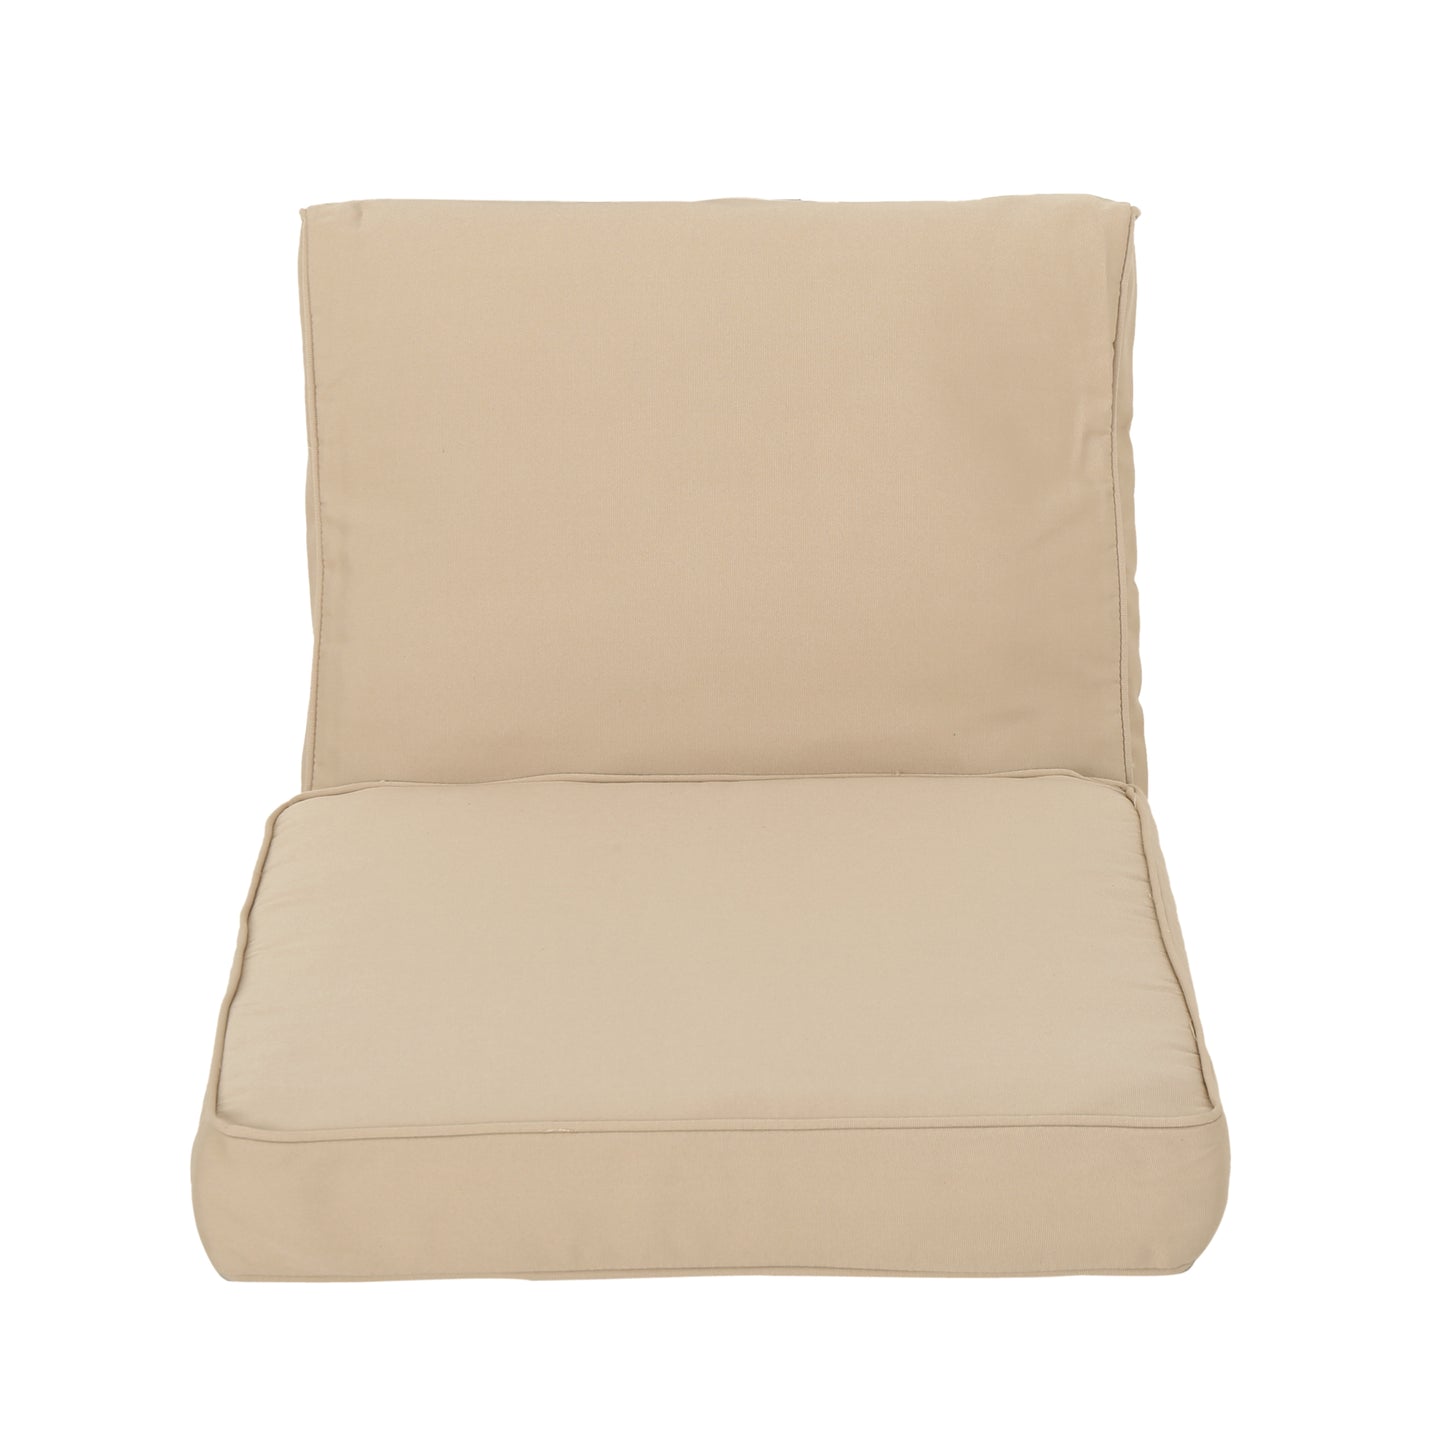 Atiyah Outdoor Water Resistant Fabric Club Chair Cushions with Piping